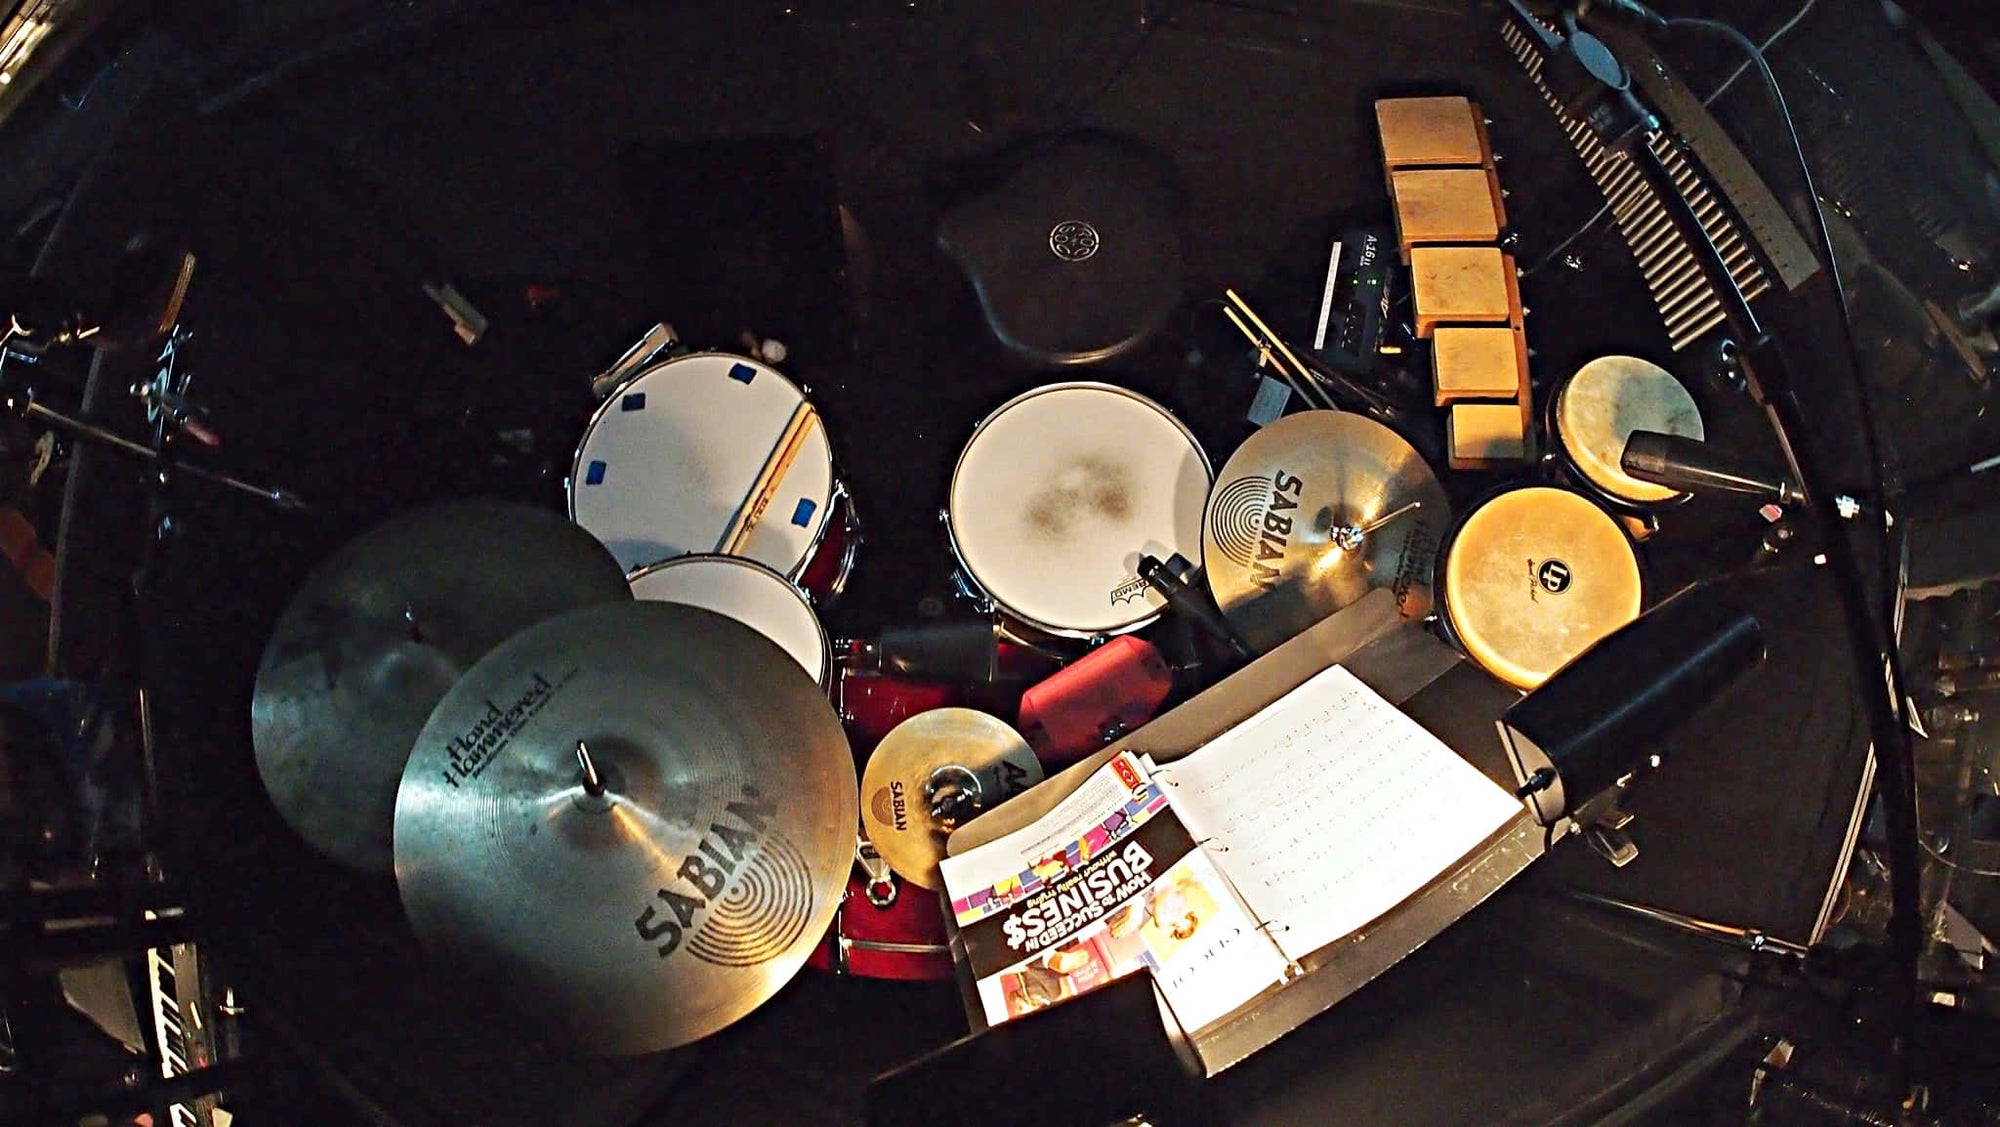 Alec Wilmart’s drum set setup for How to Succeed in Business Without Really Trying at the 5th Avenue Theatre in Seattle, Washington.